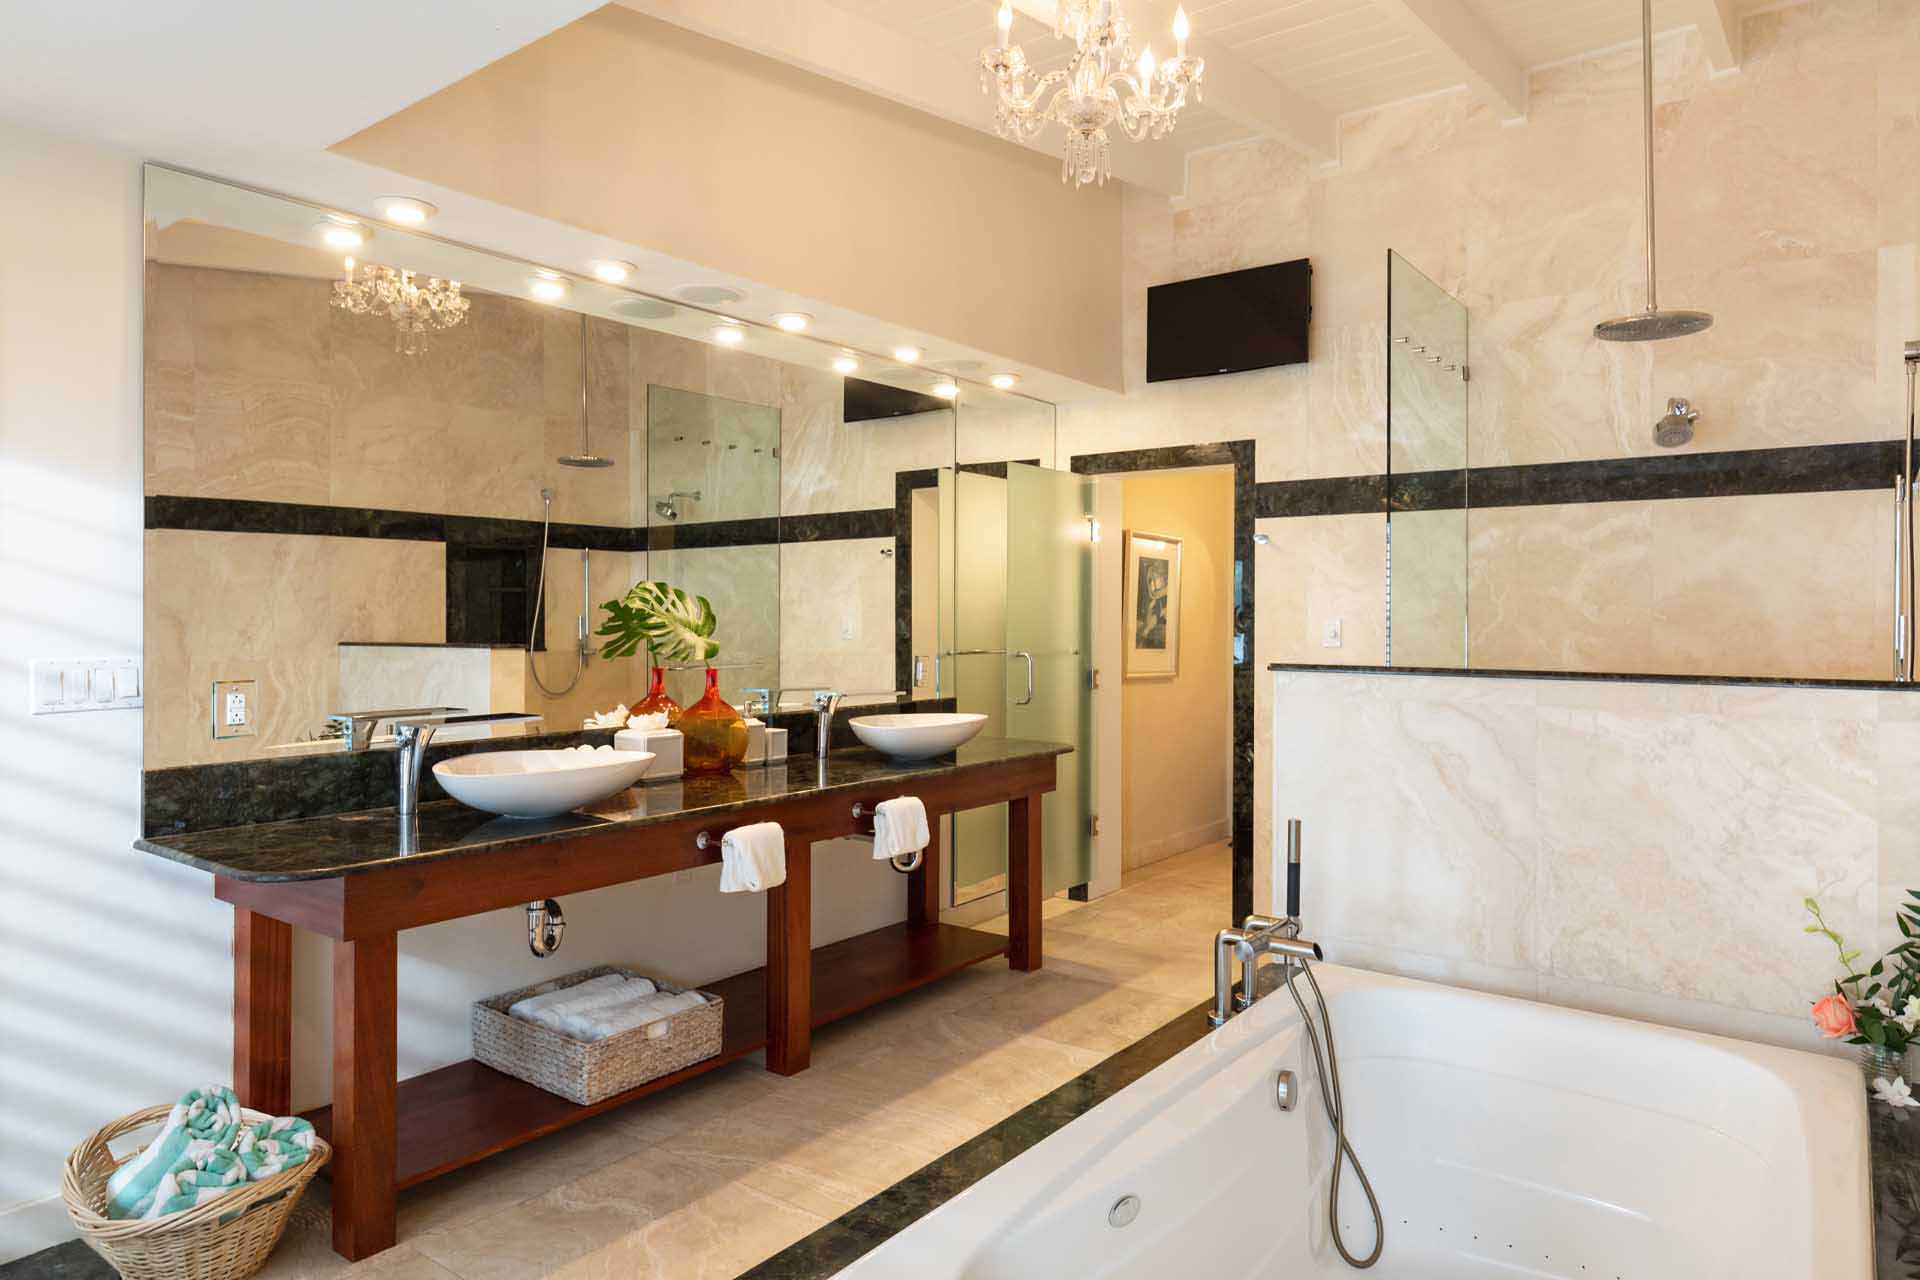 Grand Lodge large bathroom with double vanity, soaker tub, and rain shower